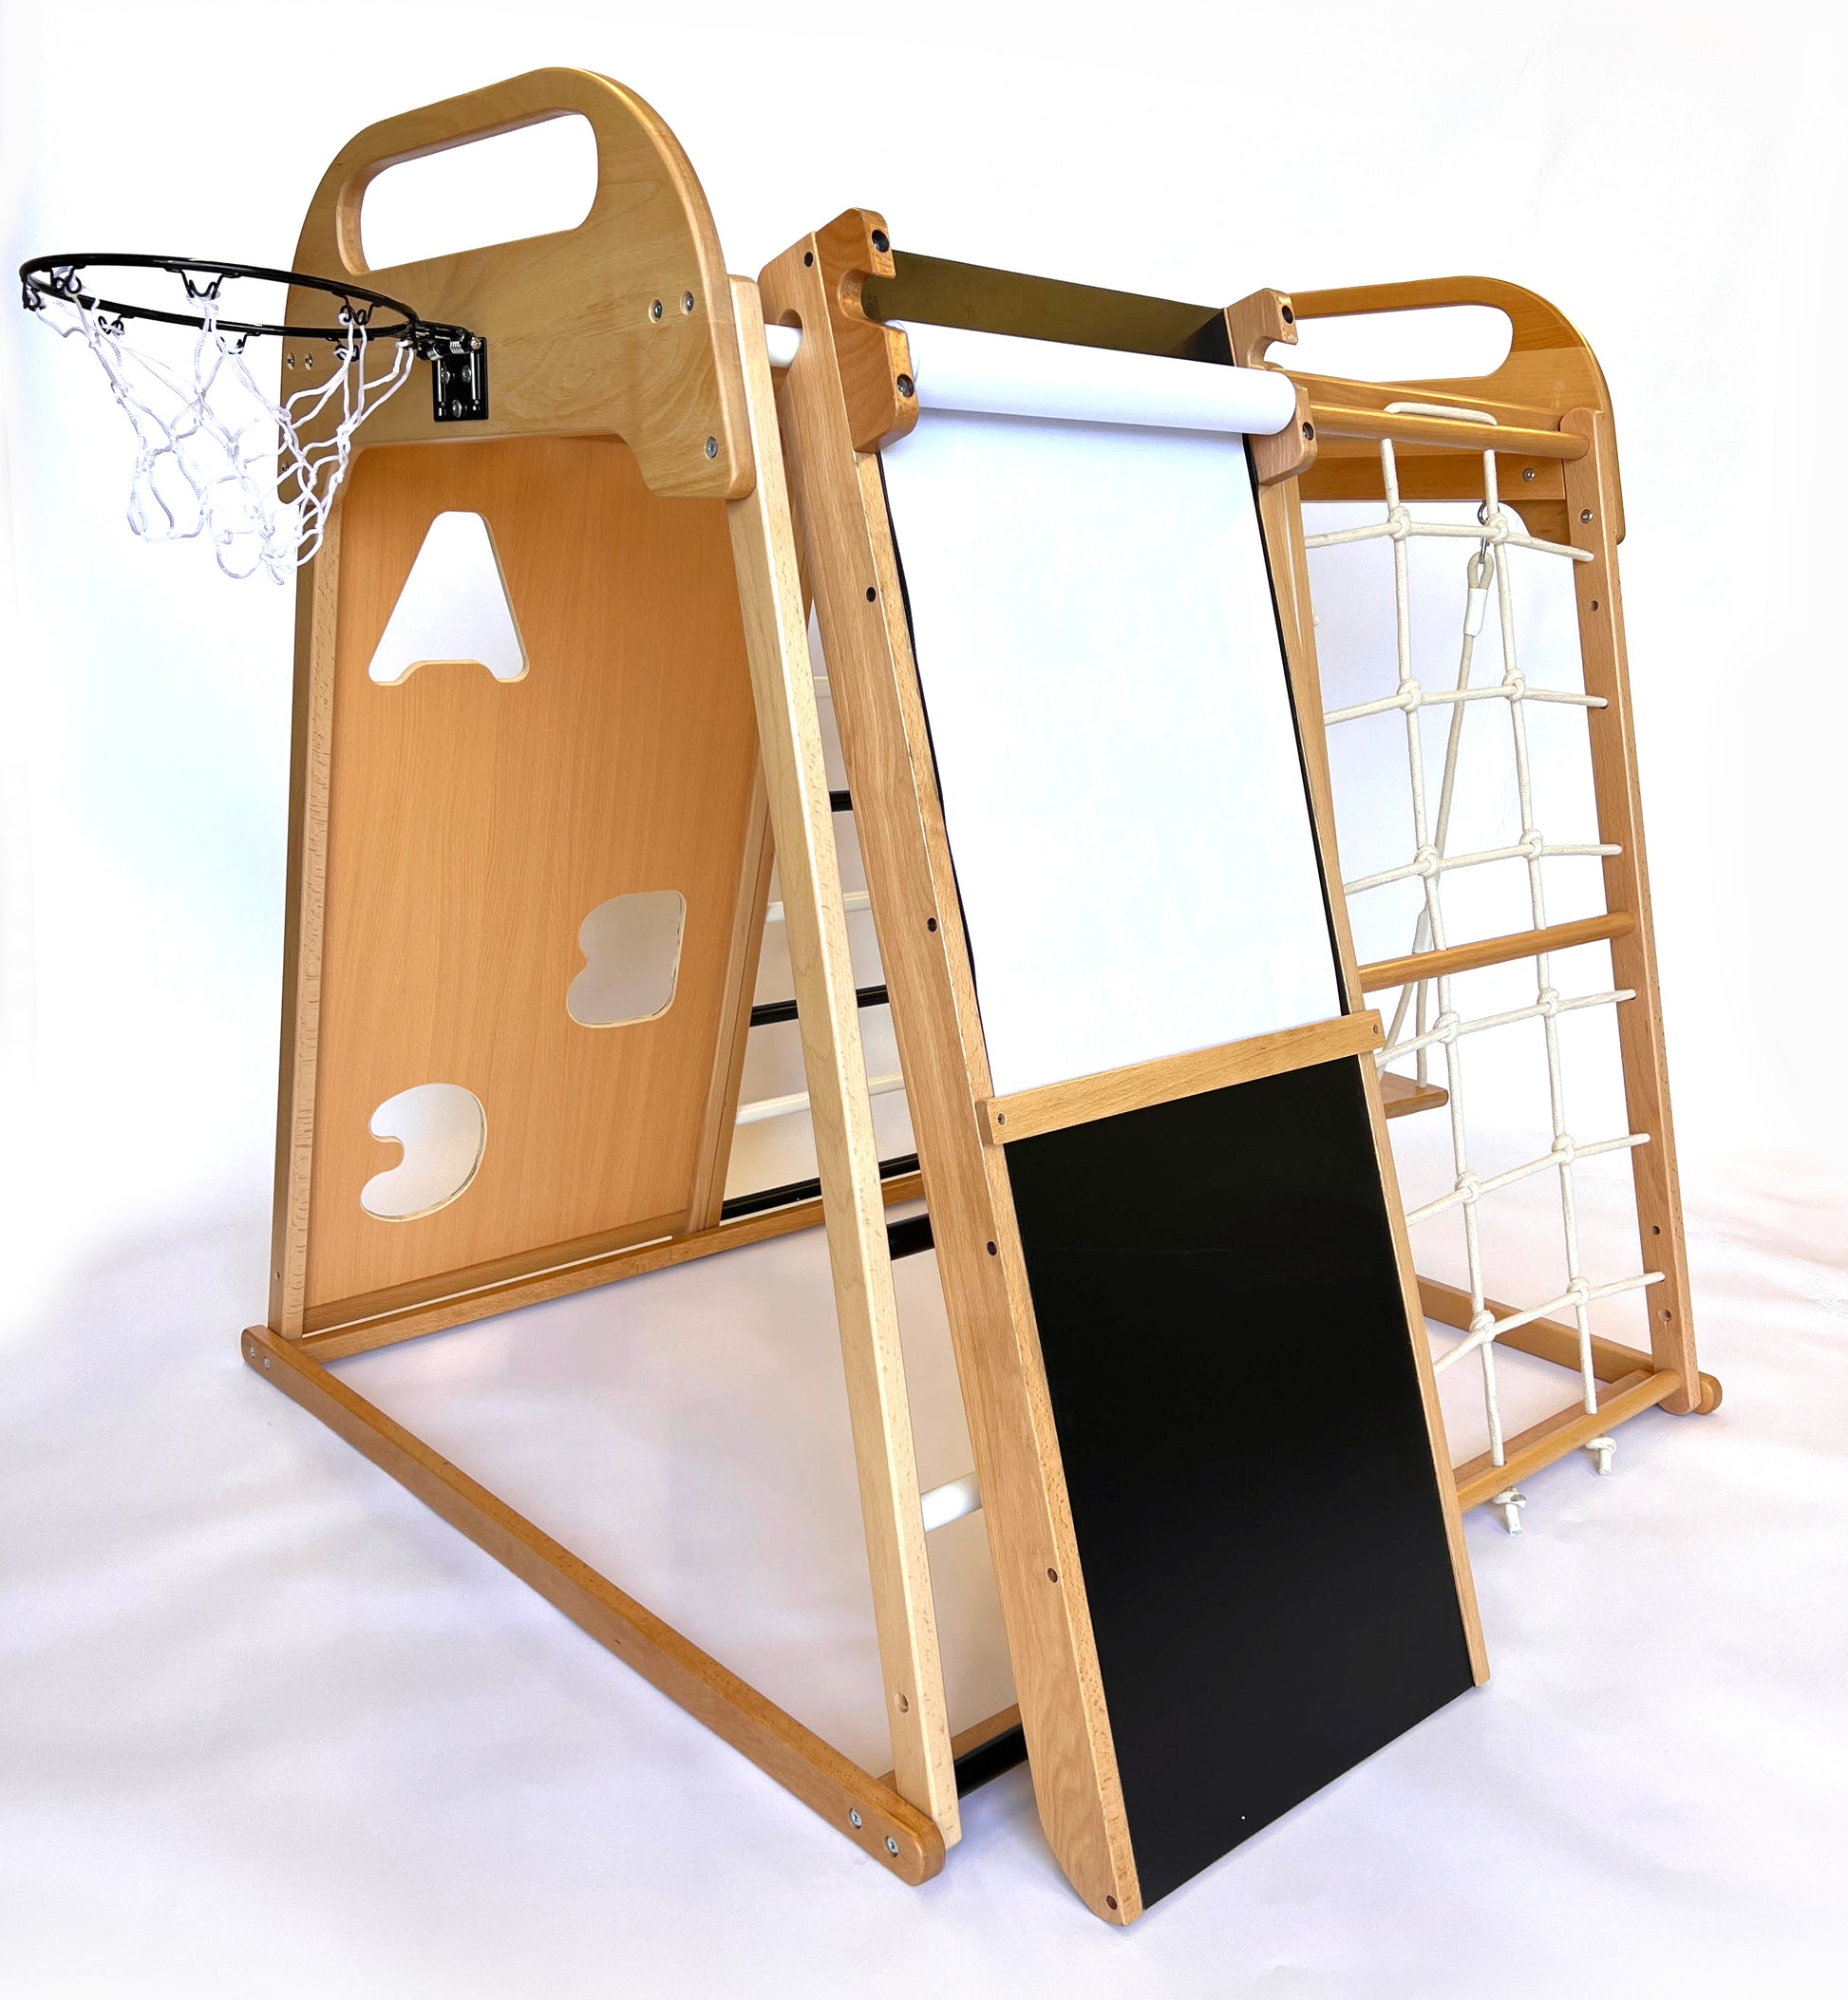 Wooden Indoor Playground Climber For